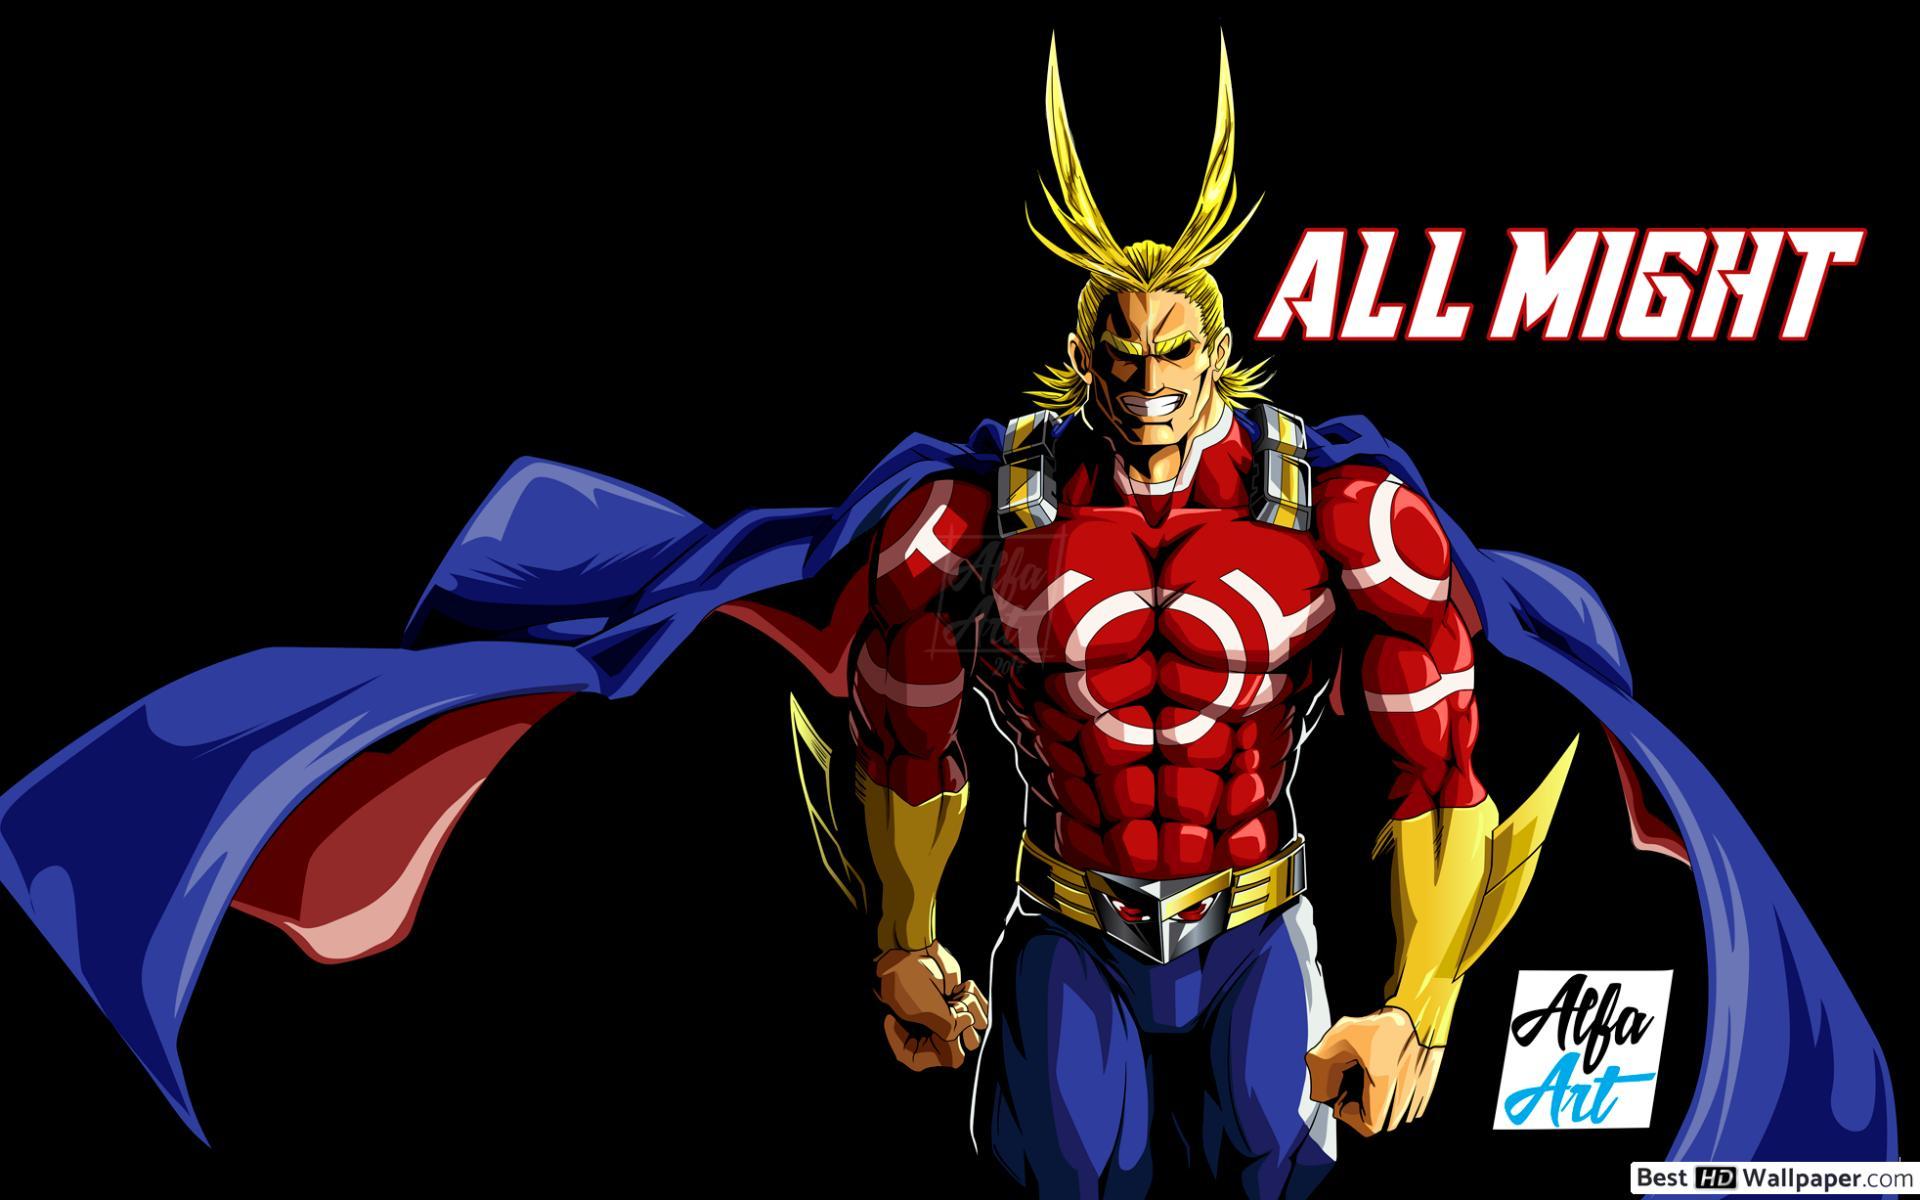 1920 x 1200 · jpeg - All Might Smash Wallpaper / Feeling cute, might smash later. - Ajor Png